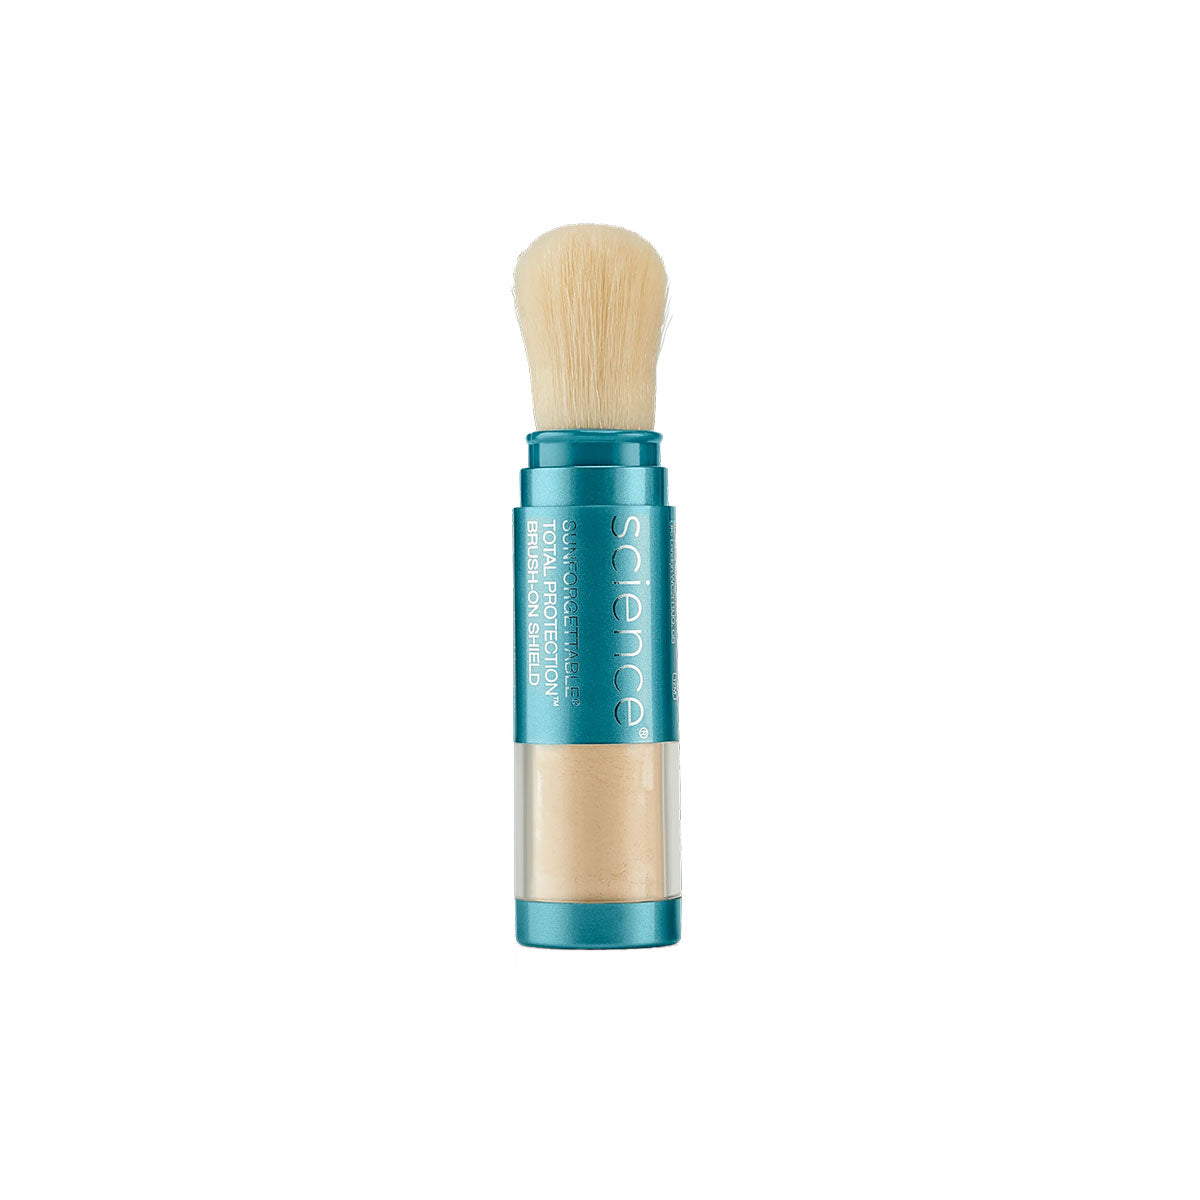 colorescience Products Sunforgettable Total Protection Brush-on Shield SPF 50 fair